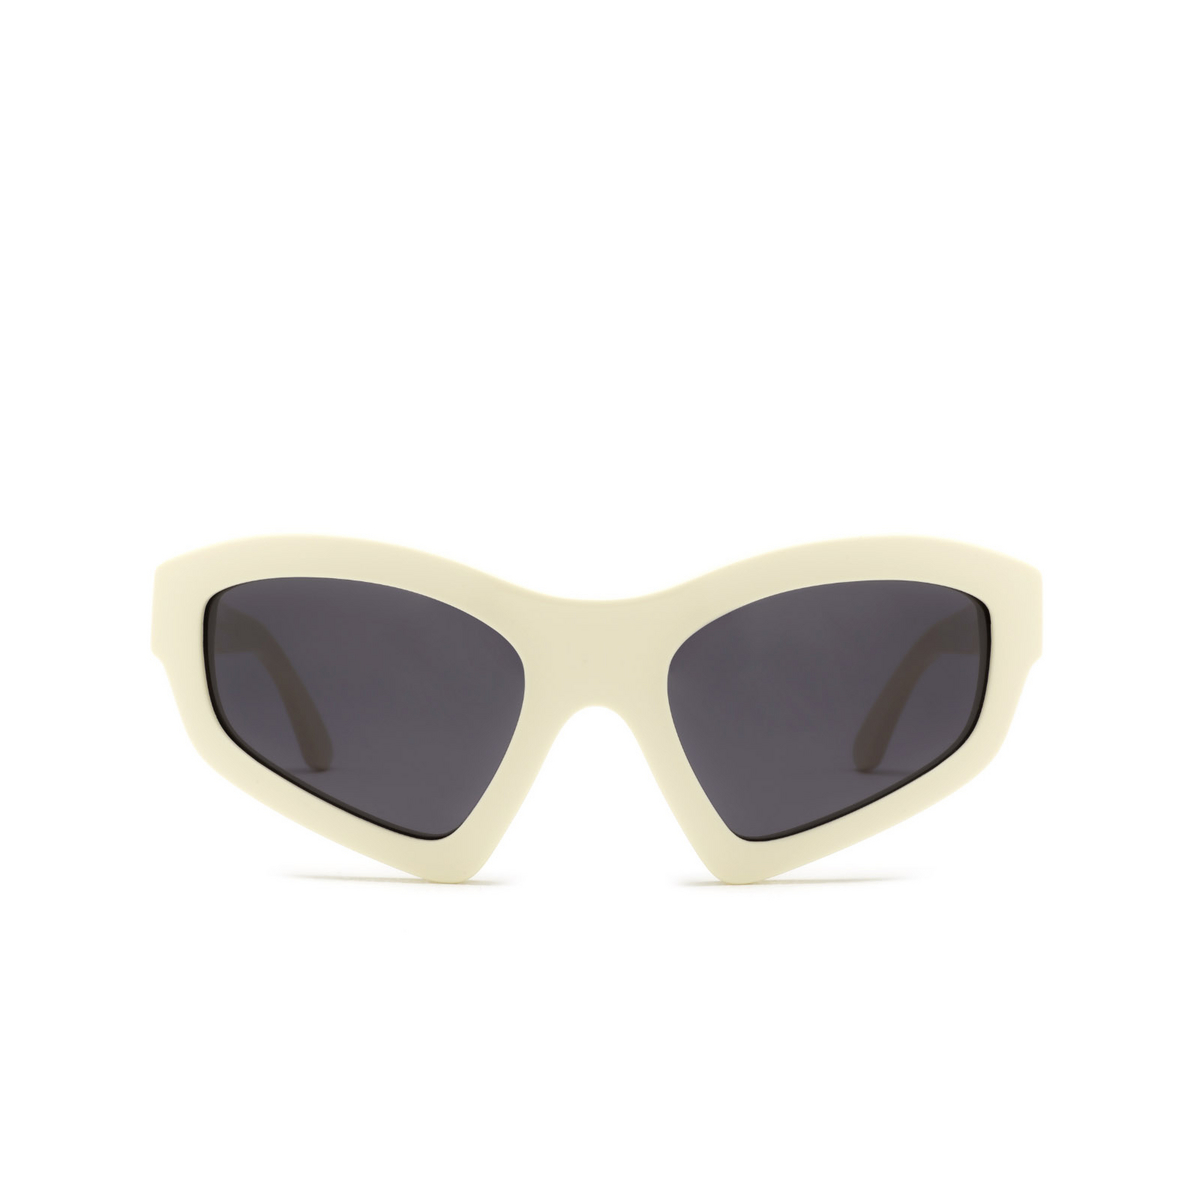 Huma® Cat-eye Sunglasses: Enne color Ivory 07 - front view.